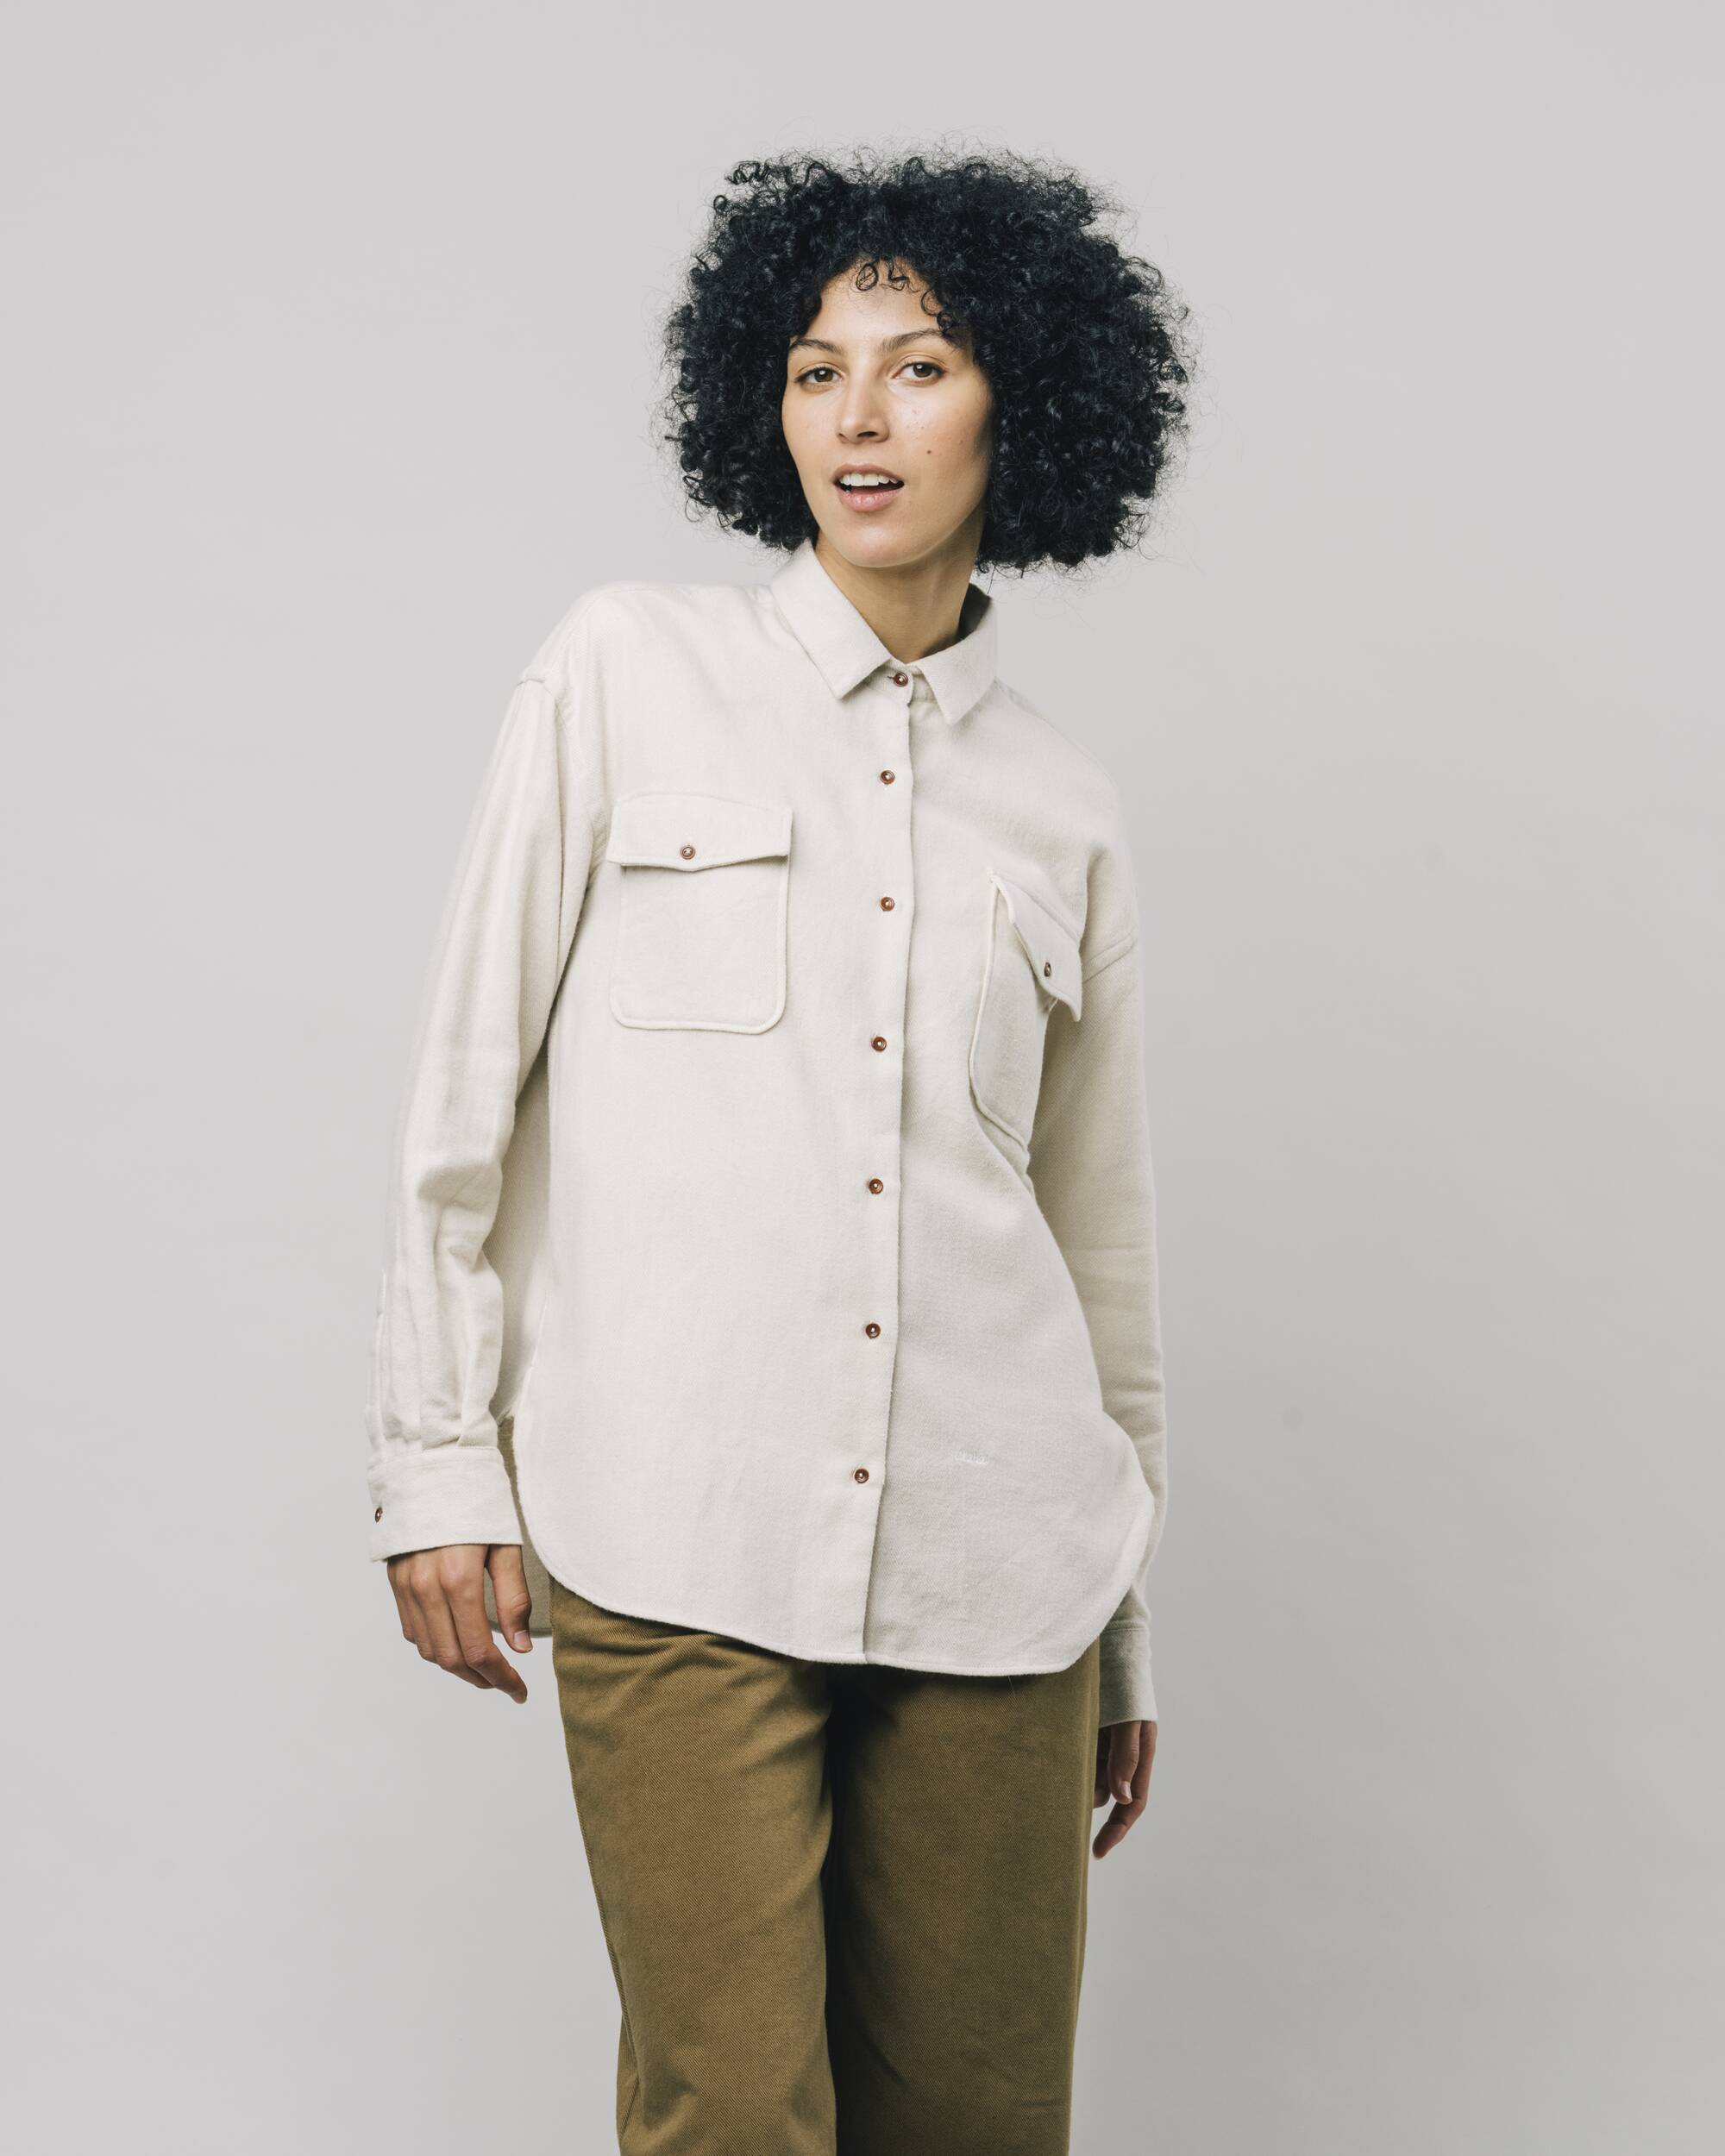 Blouse "Alaska" in off-white made from 100% organic cotton flannel from Brava Fabrics